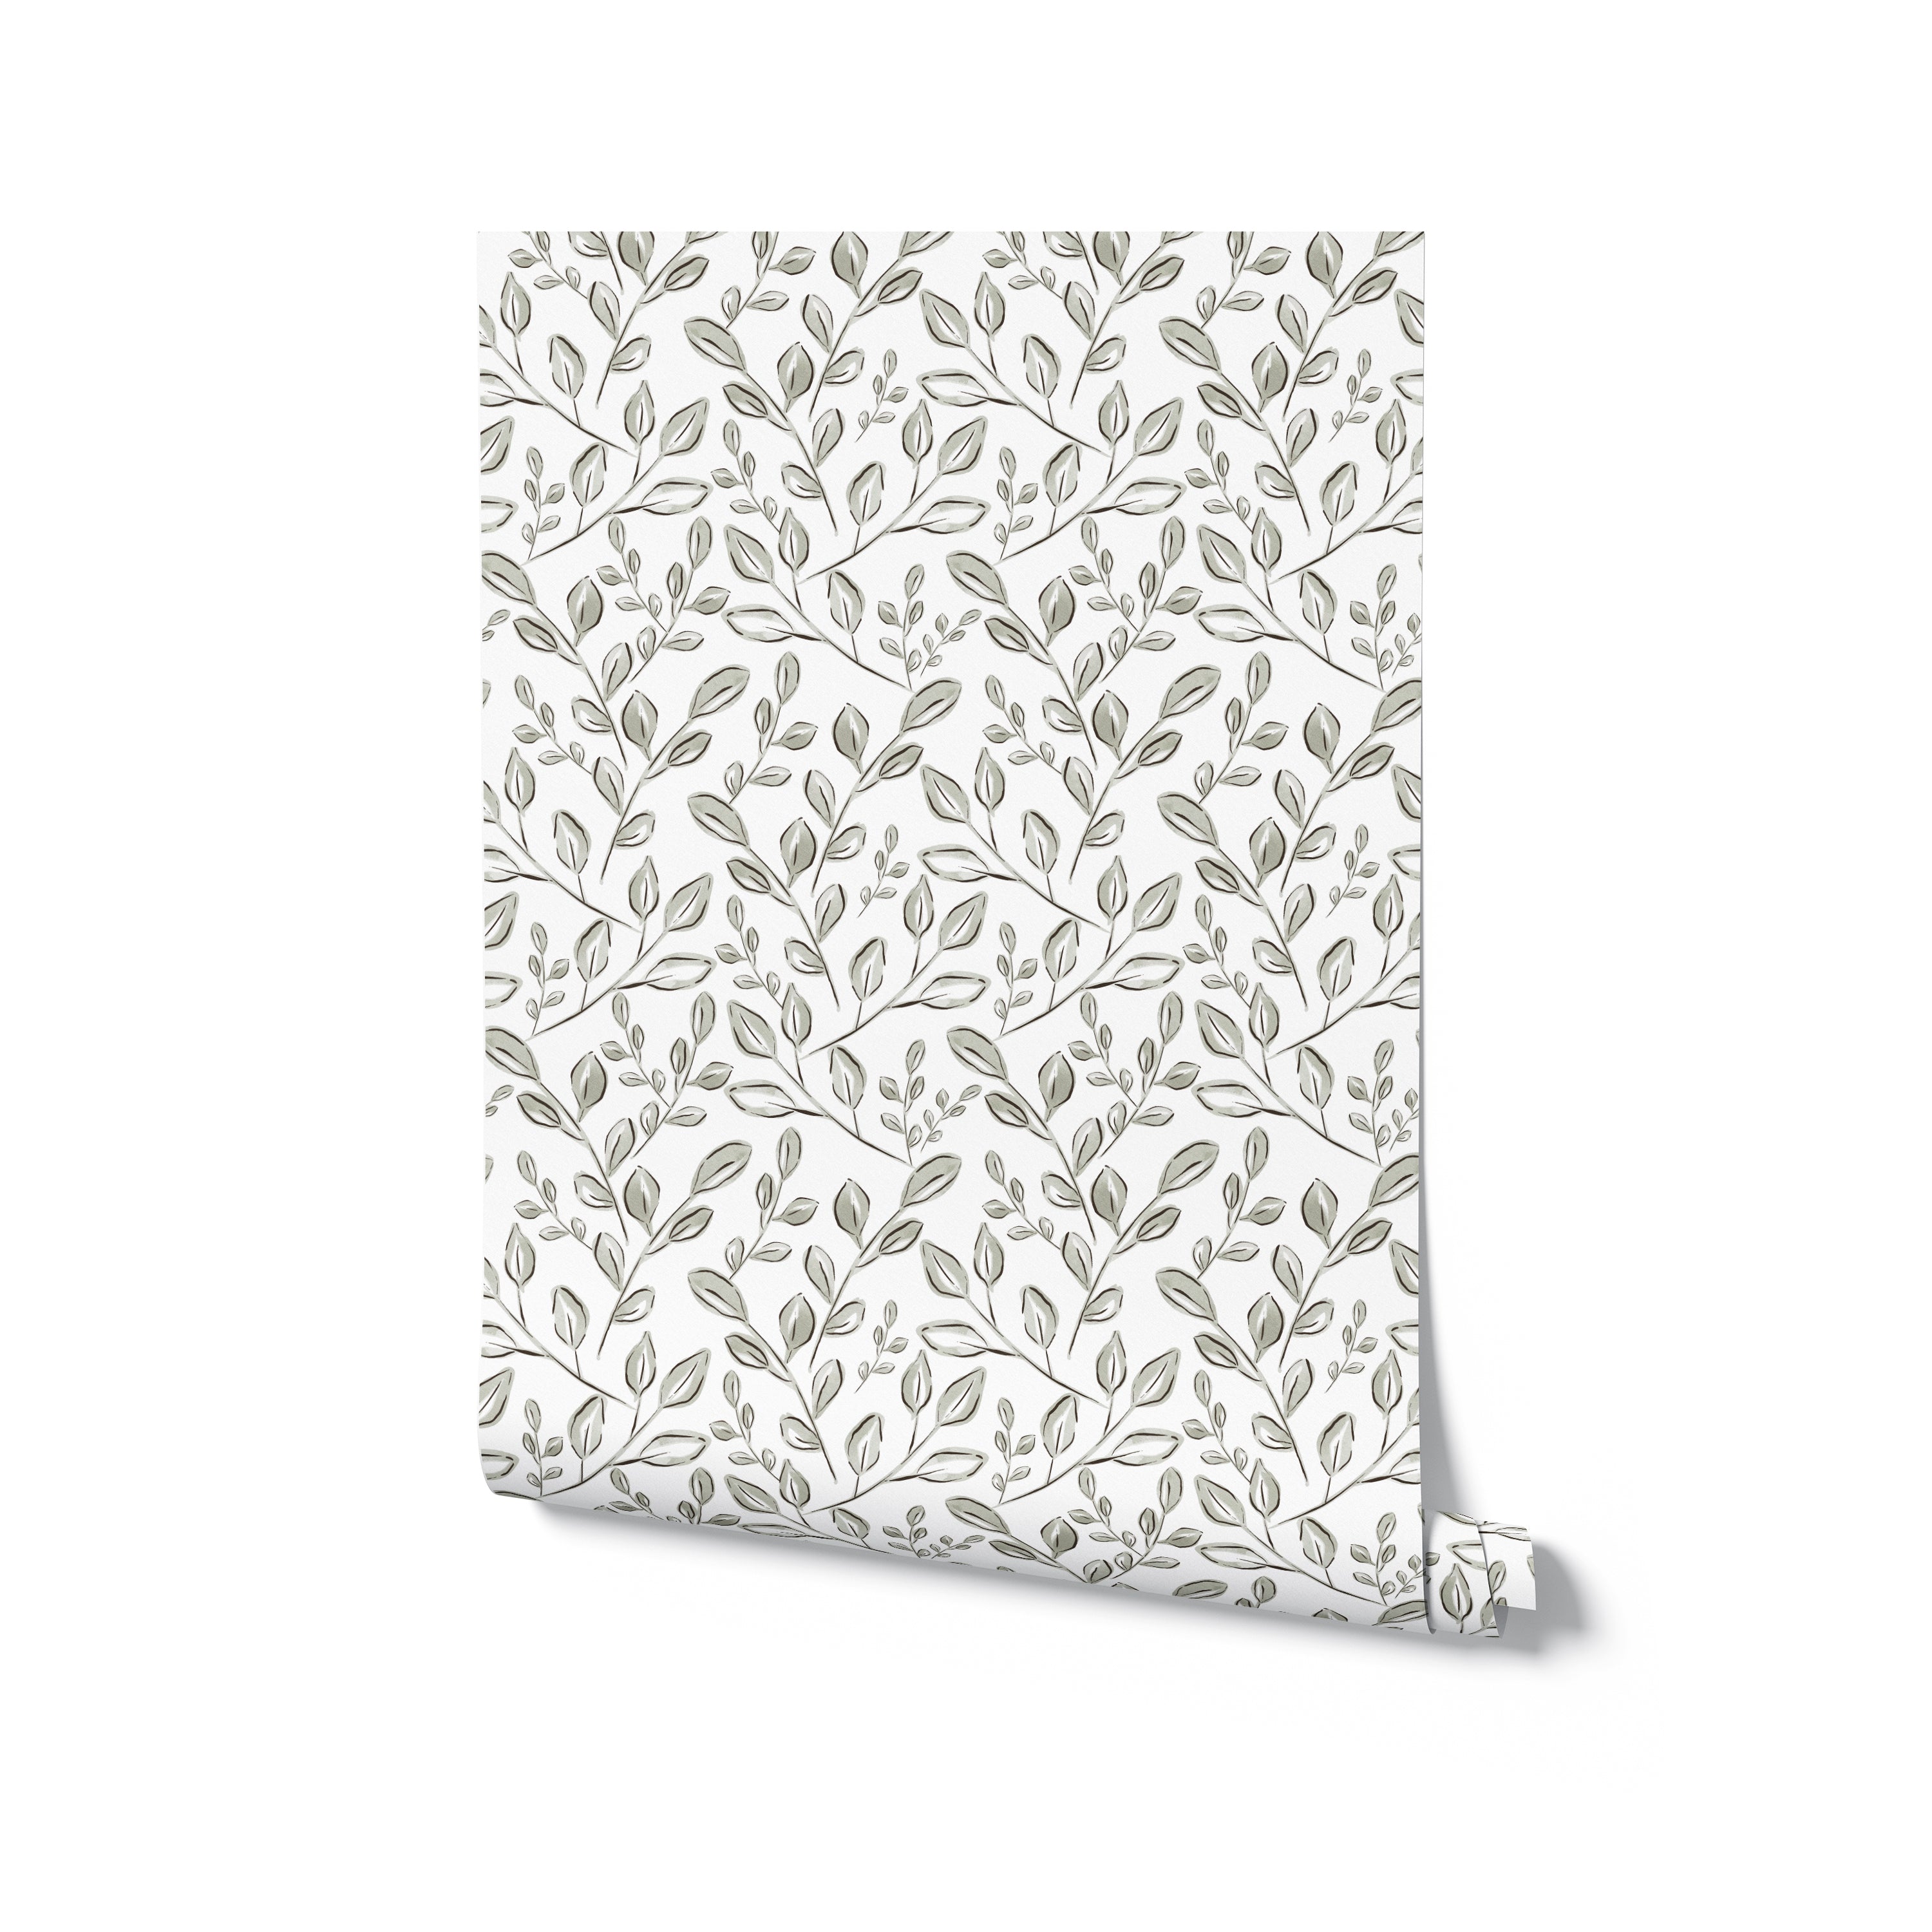 Rolled-up version of the Sweet Watercolour Floral Wallpaper showcasing its detailed watercolor floral patterns. The soft grays and muted greens offer a subtle yet elegant design, perfect for adding a touch of sophistication to any room.